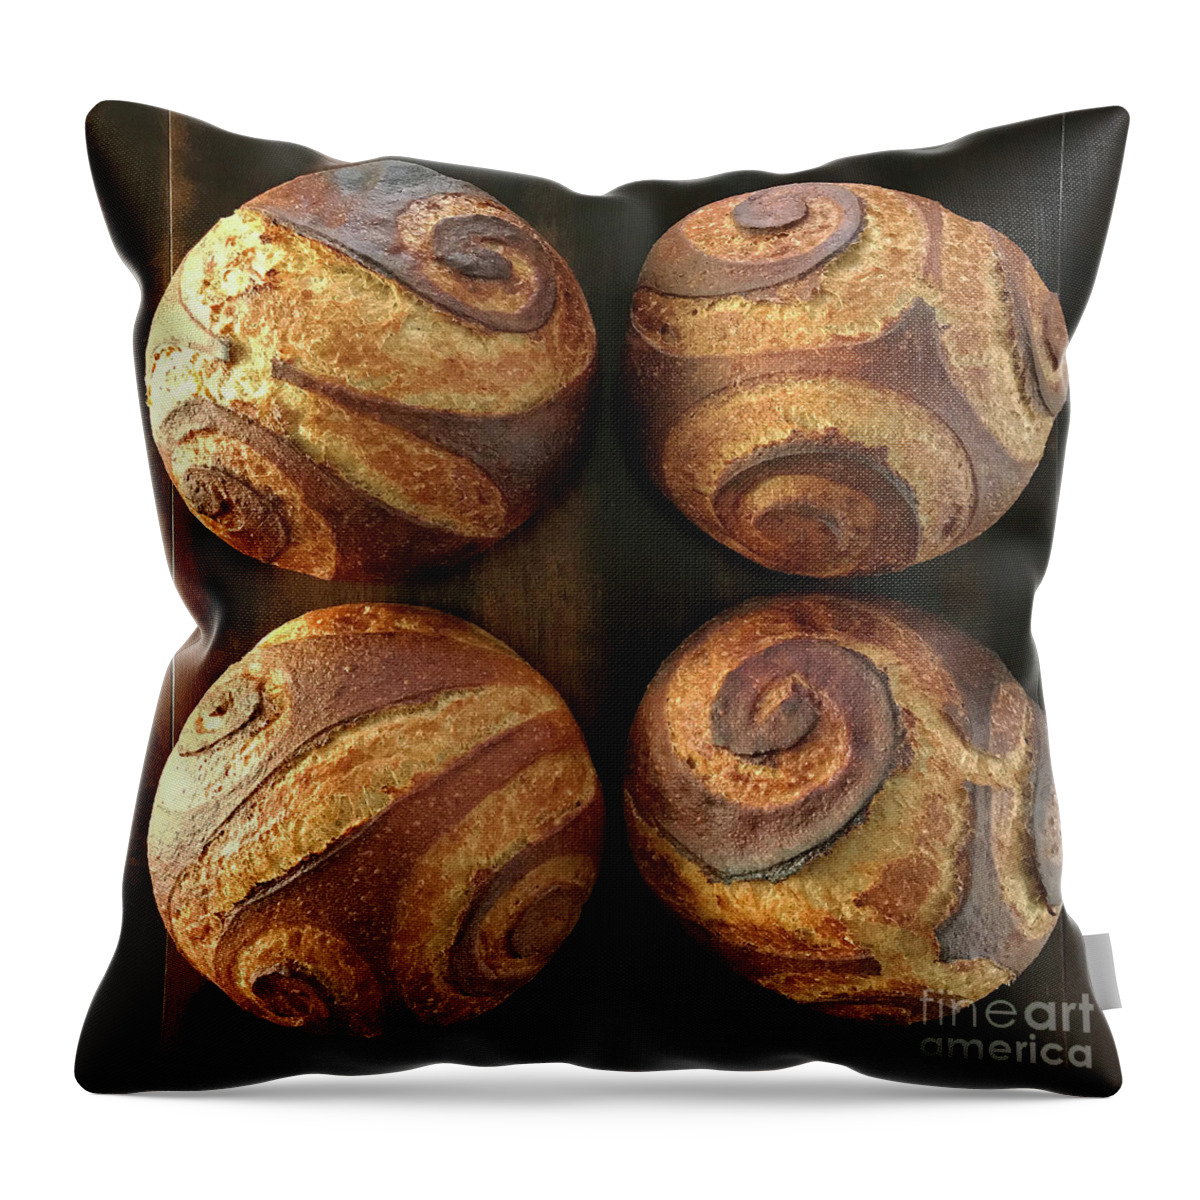 Bread Throw Pillow featuring the photograph White And Rye Sourdough Spiral Set 3 by Amy E Fraser